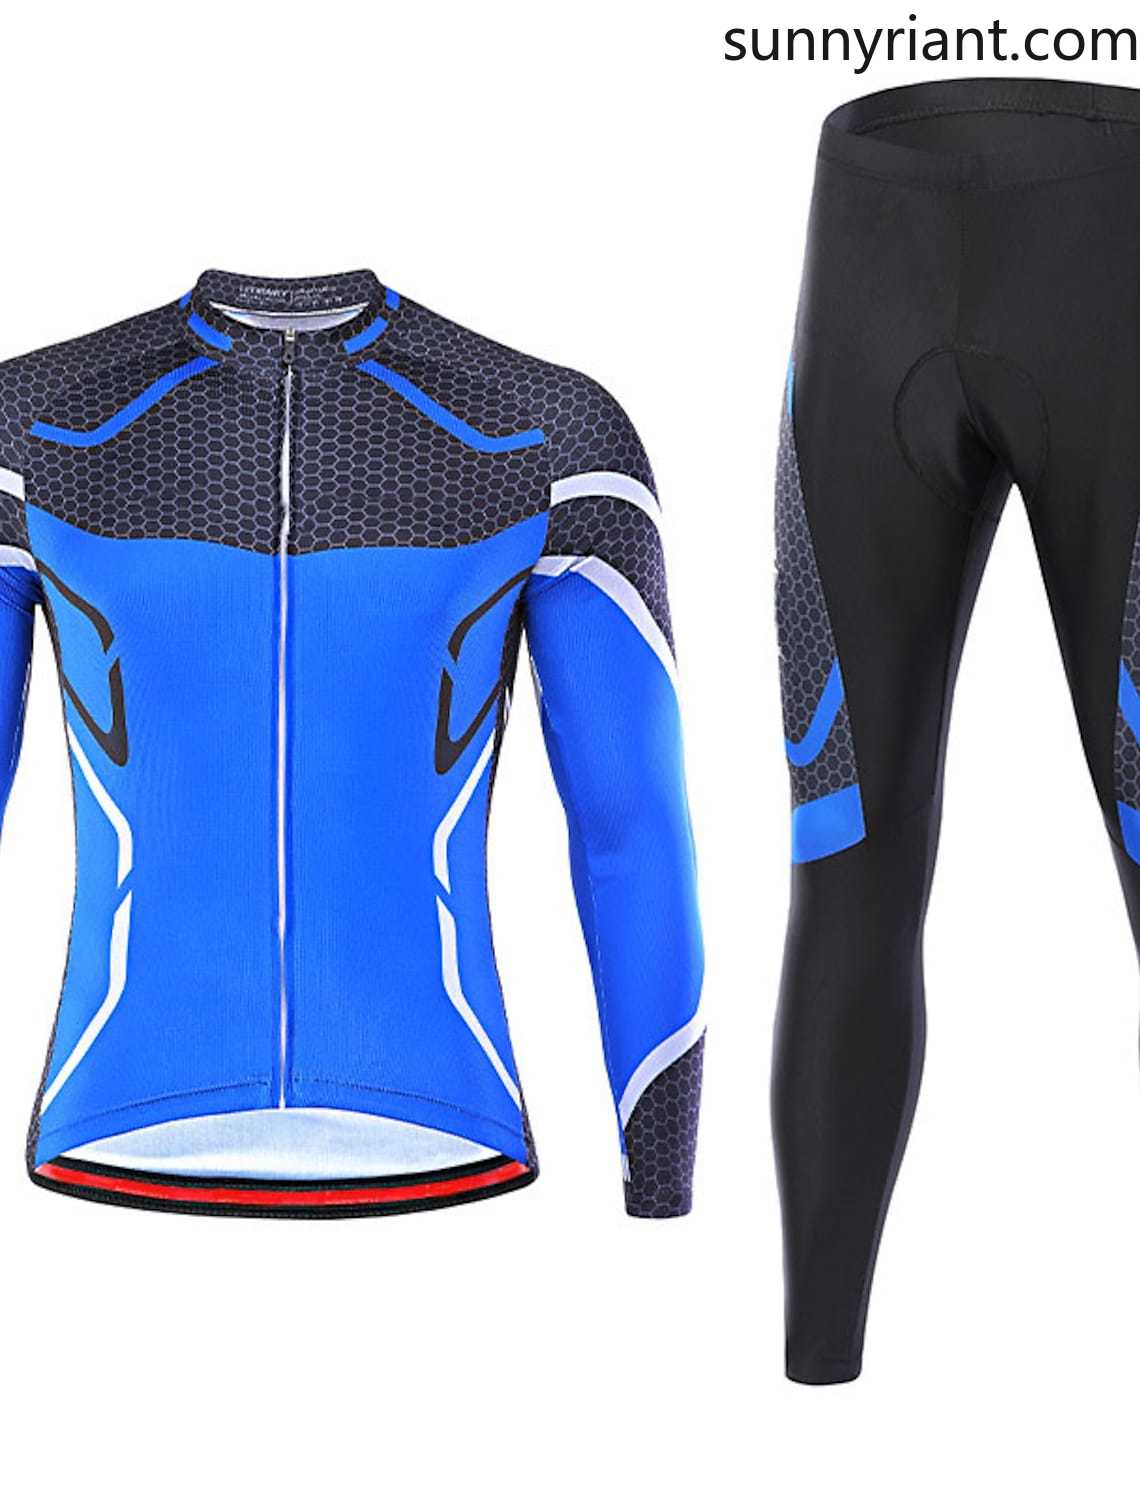 Grams Men's Long Sleeve Cycling Jersey with Tights